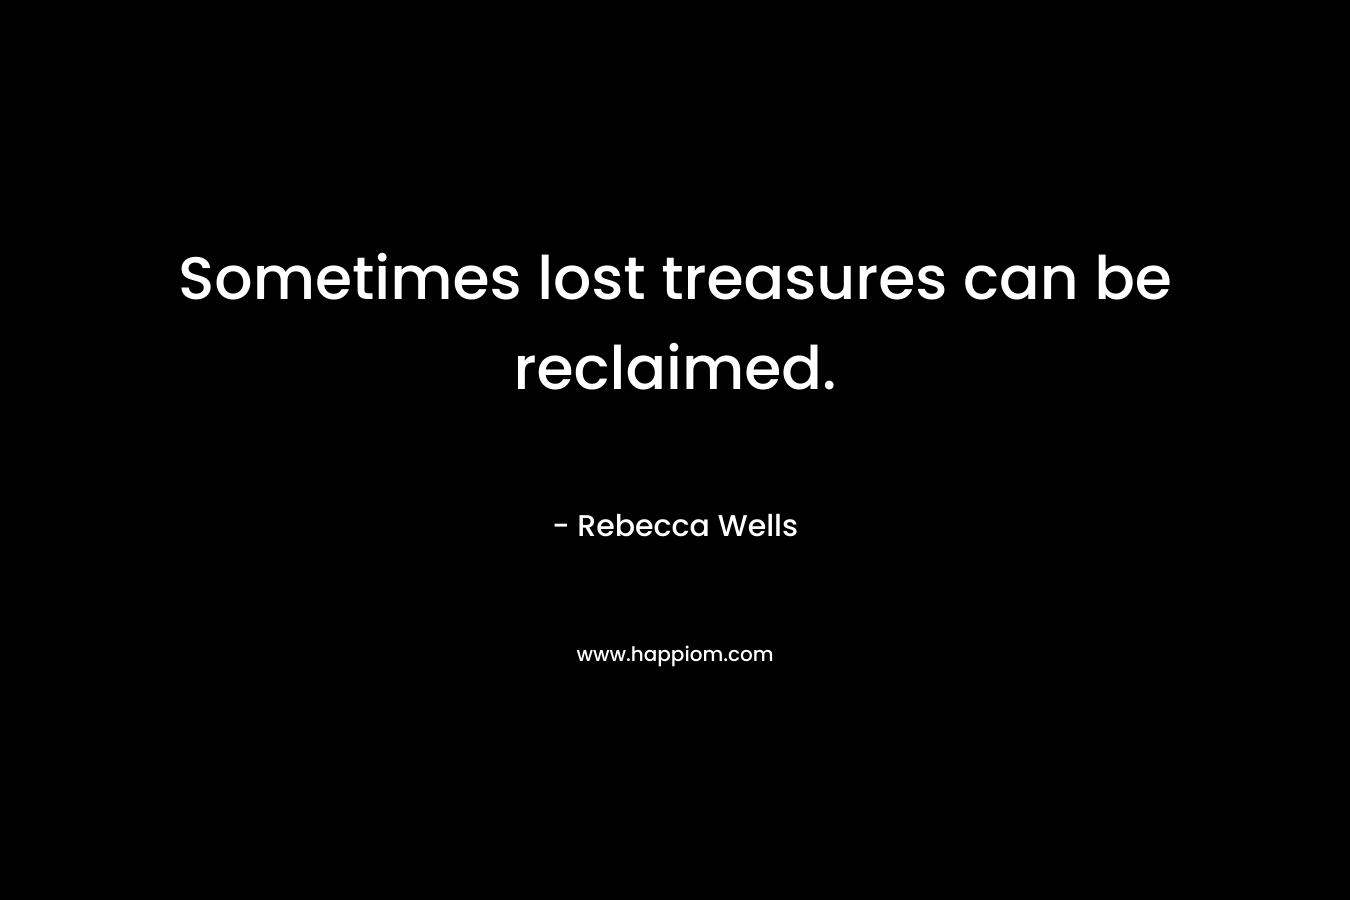 Sometimes lost treasures can be reclaimed. – Rebecca Wells